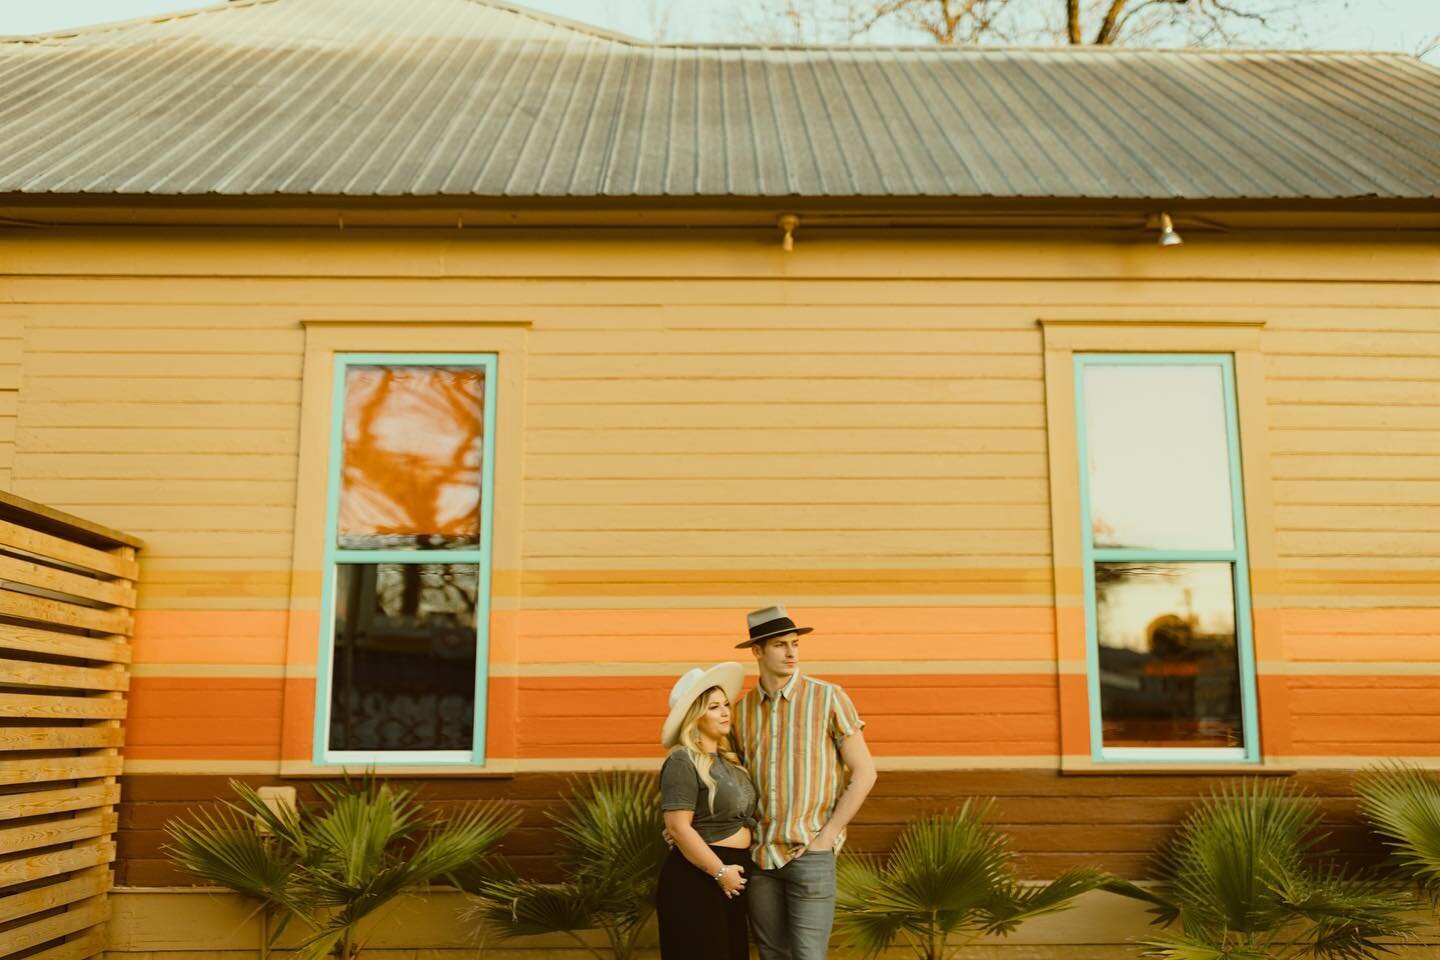 Seriously LOVED shooting in Austin. I need someone to want to do a fun elopement there!